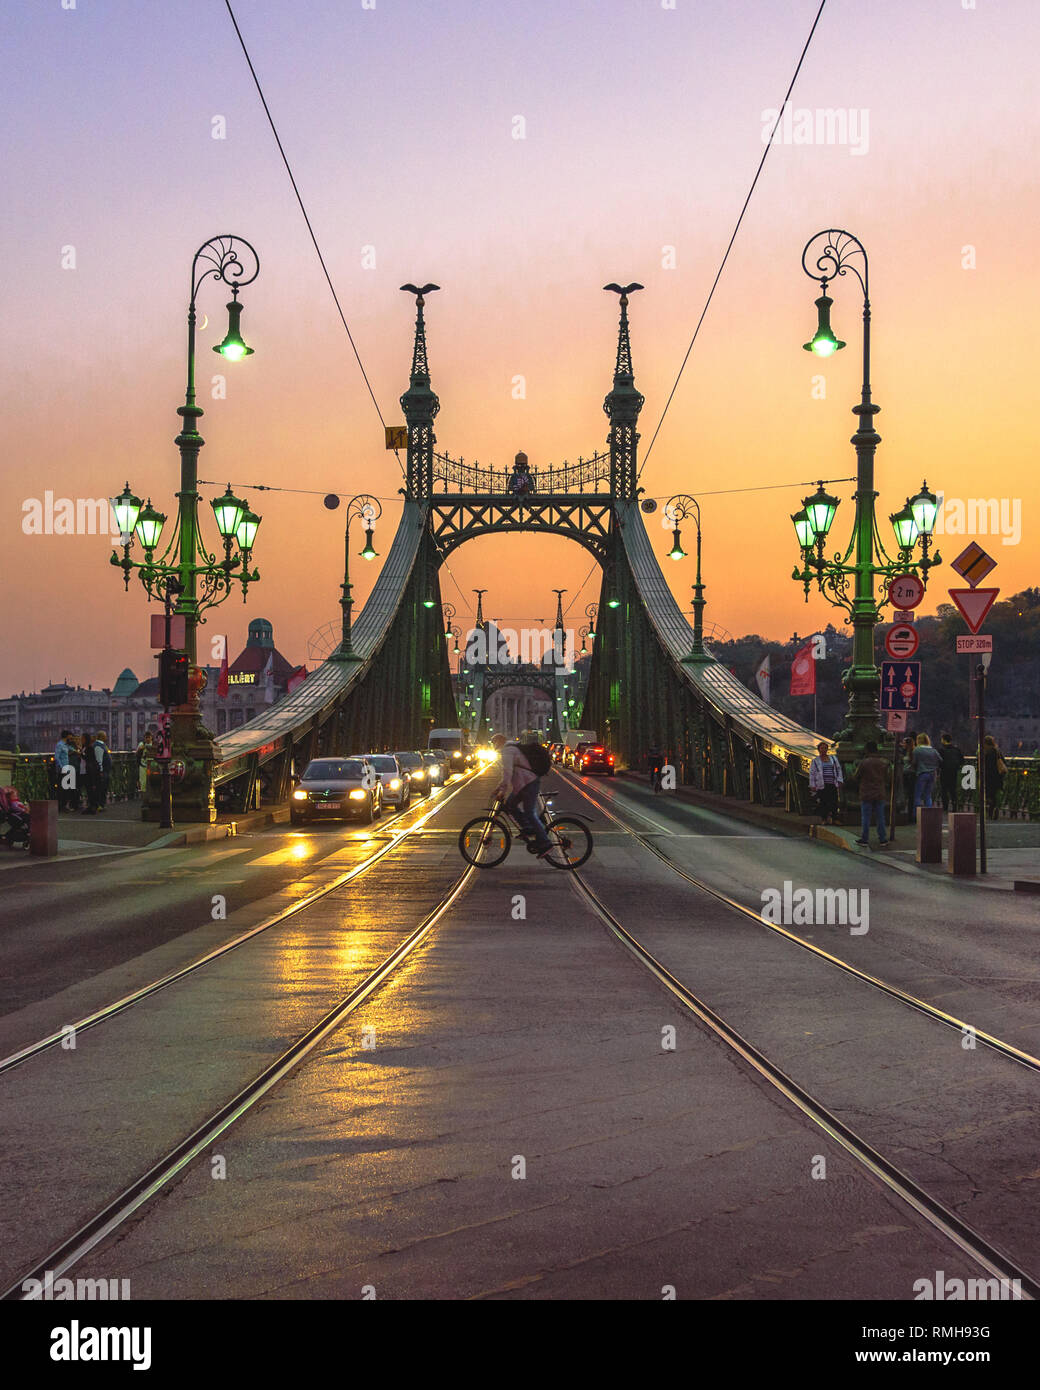 A bicyclist crossing in front of the Liberty Bridge in Budapest at twilight Stock Photo